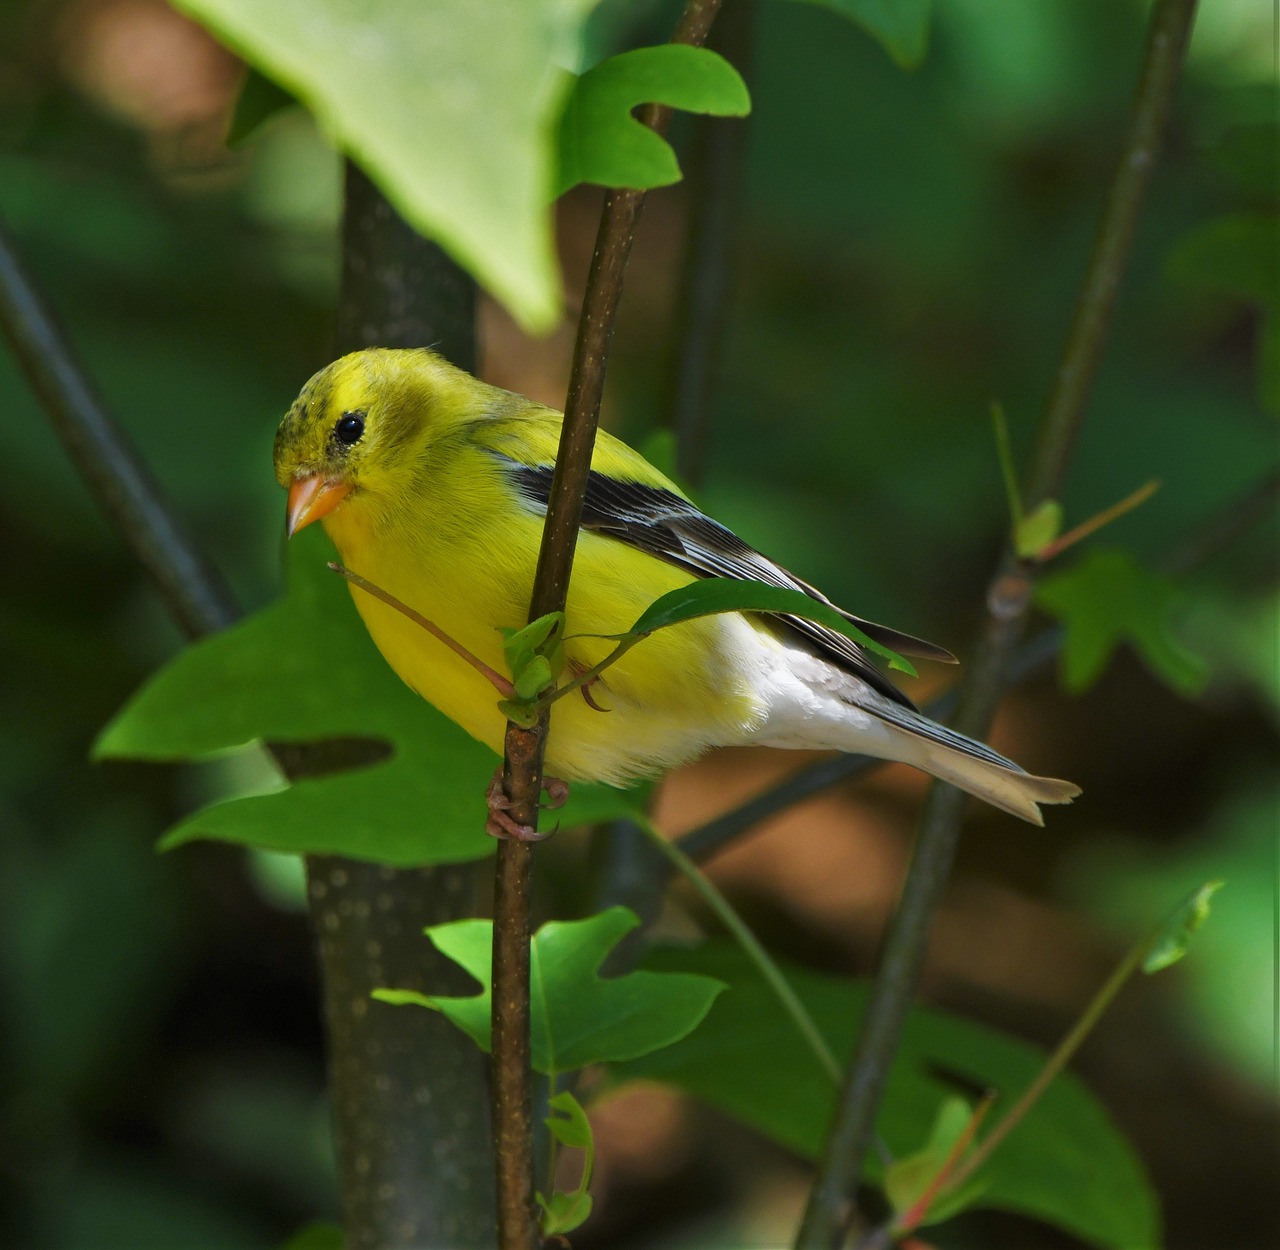 a small yellow bird sitting on top of a tree branch, a portrait, by Susan Heidi, flickr, amongst foliage, summer day, f/3.5, a blond